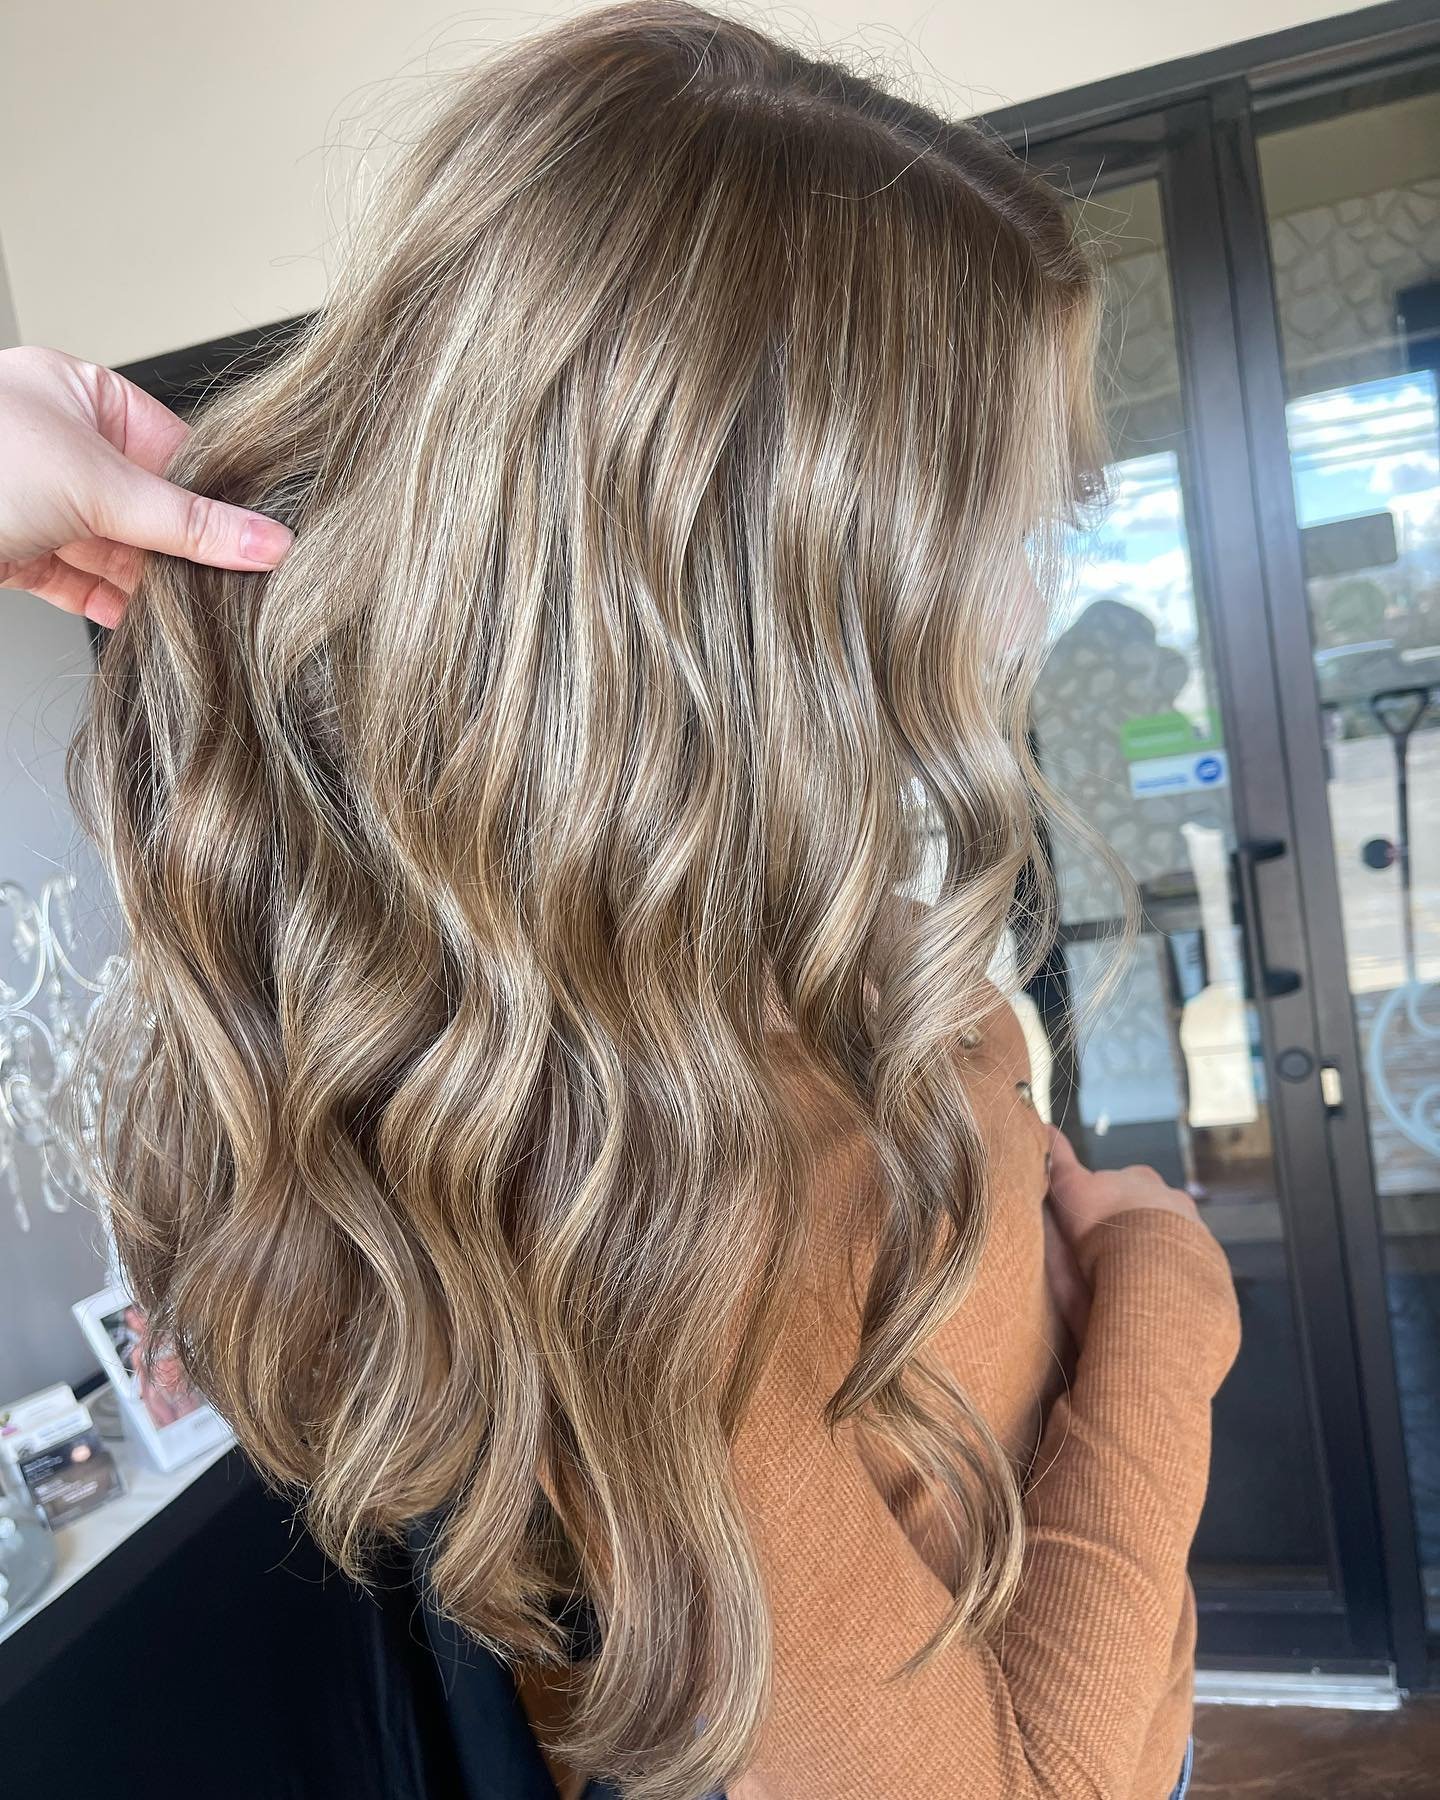 Long time no hair post! 💇🏼&zwj;♀️ 
Fell in love with this color transformation! Went from overgrown blonde to a bronze balayage. Much lower maintenance and a beautiful result! 
&bull;
&bull;
&bull;
&bull;
#balayage #livedincolor #livedinhair #blond